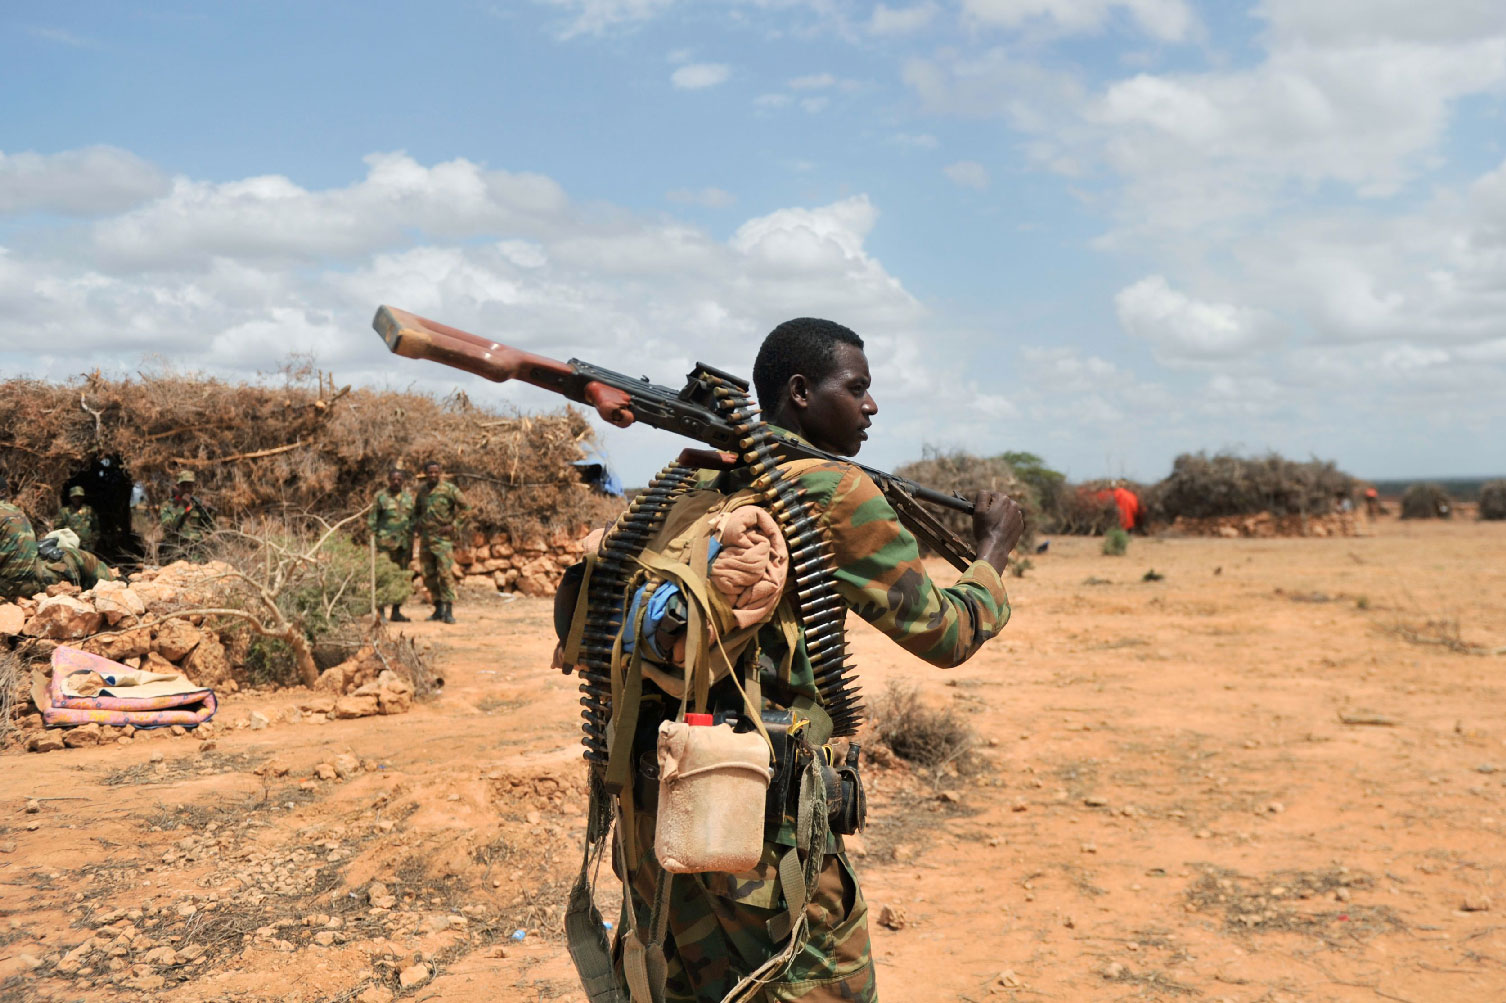 A handout photo taken on June 10, 2016 and released by AMISOM shows an Ethiopian soldier serving under the African Union Mission in Somalia (AMISOM) patroling in Halgan village, Hiran region.